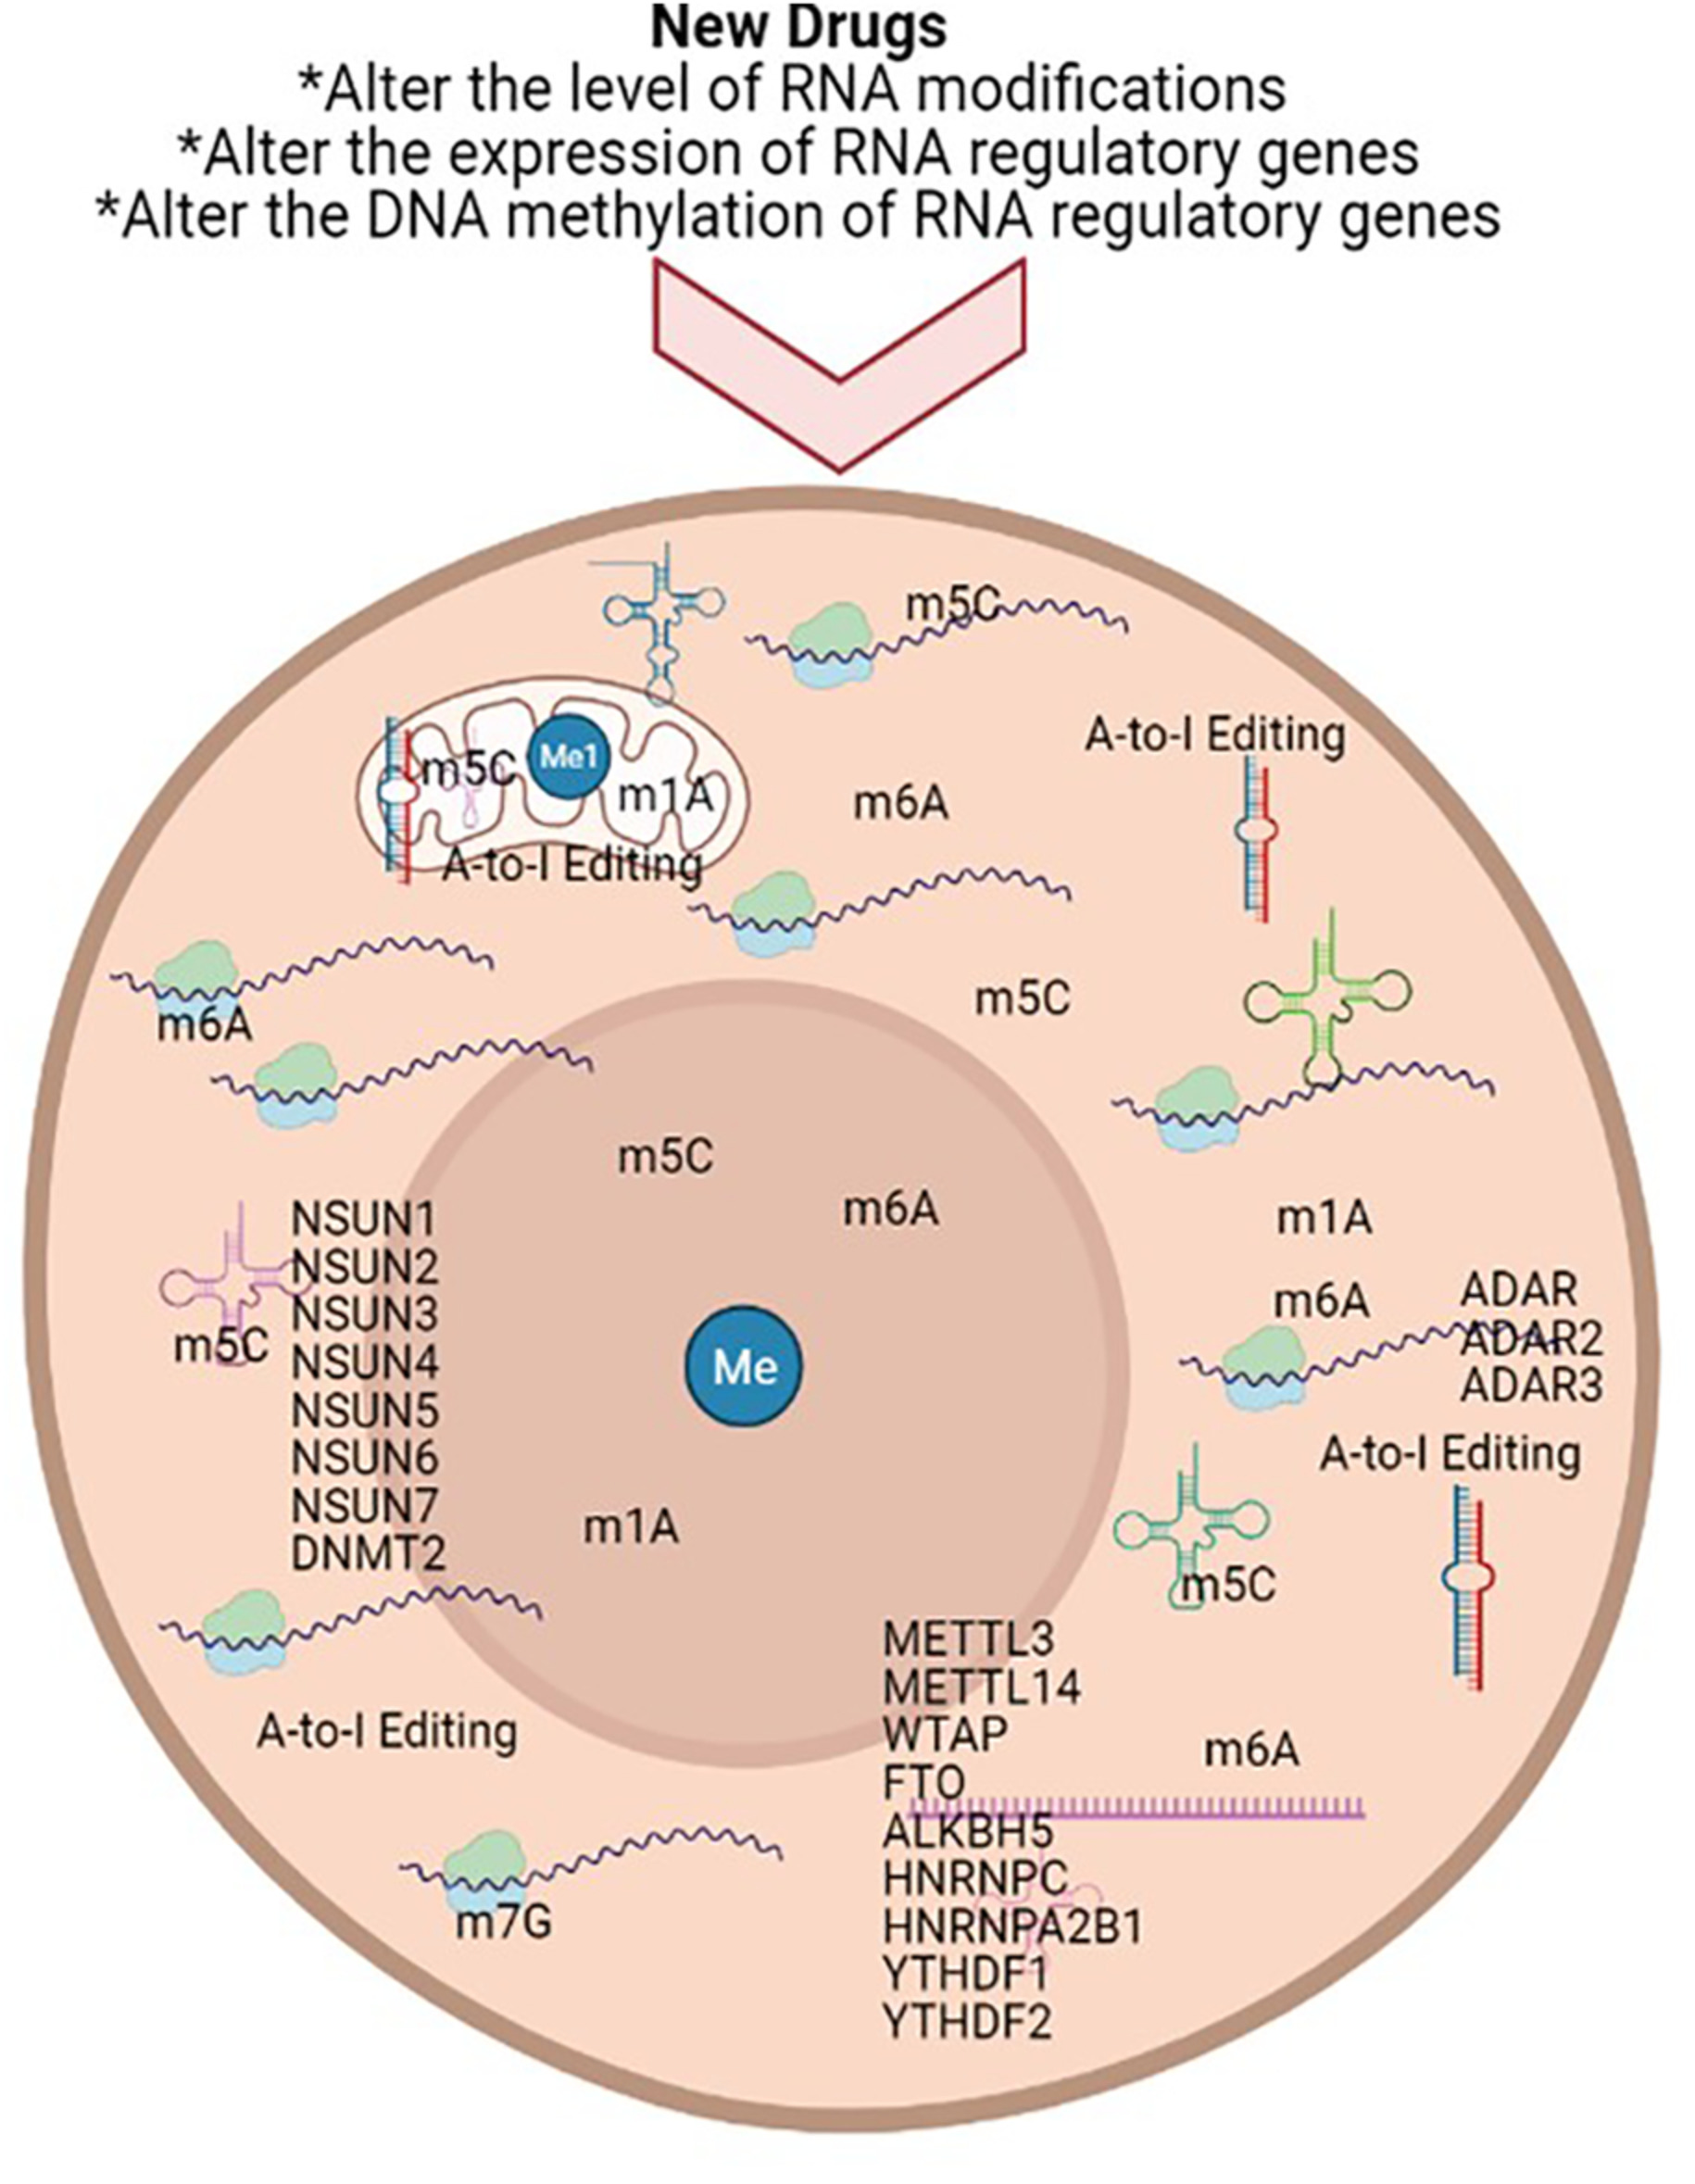 RNA modifications as emerging therapeutic targets